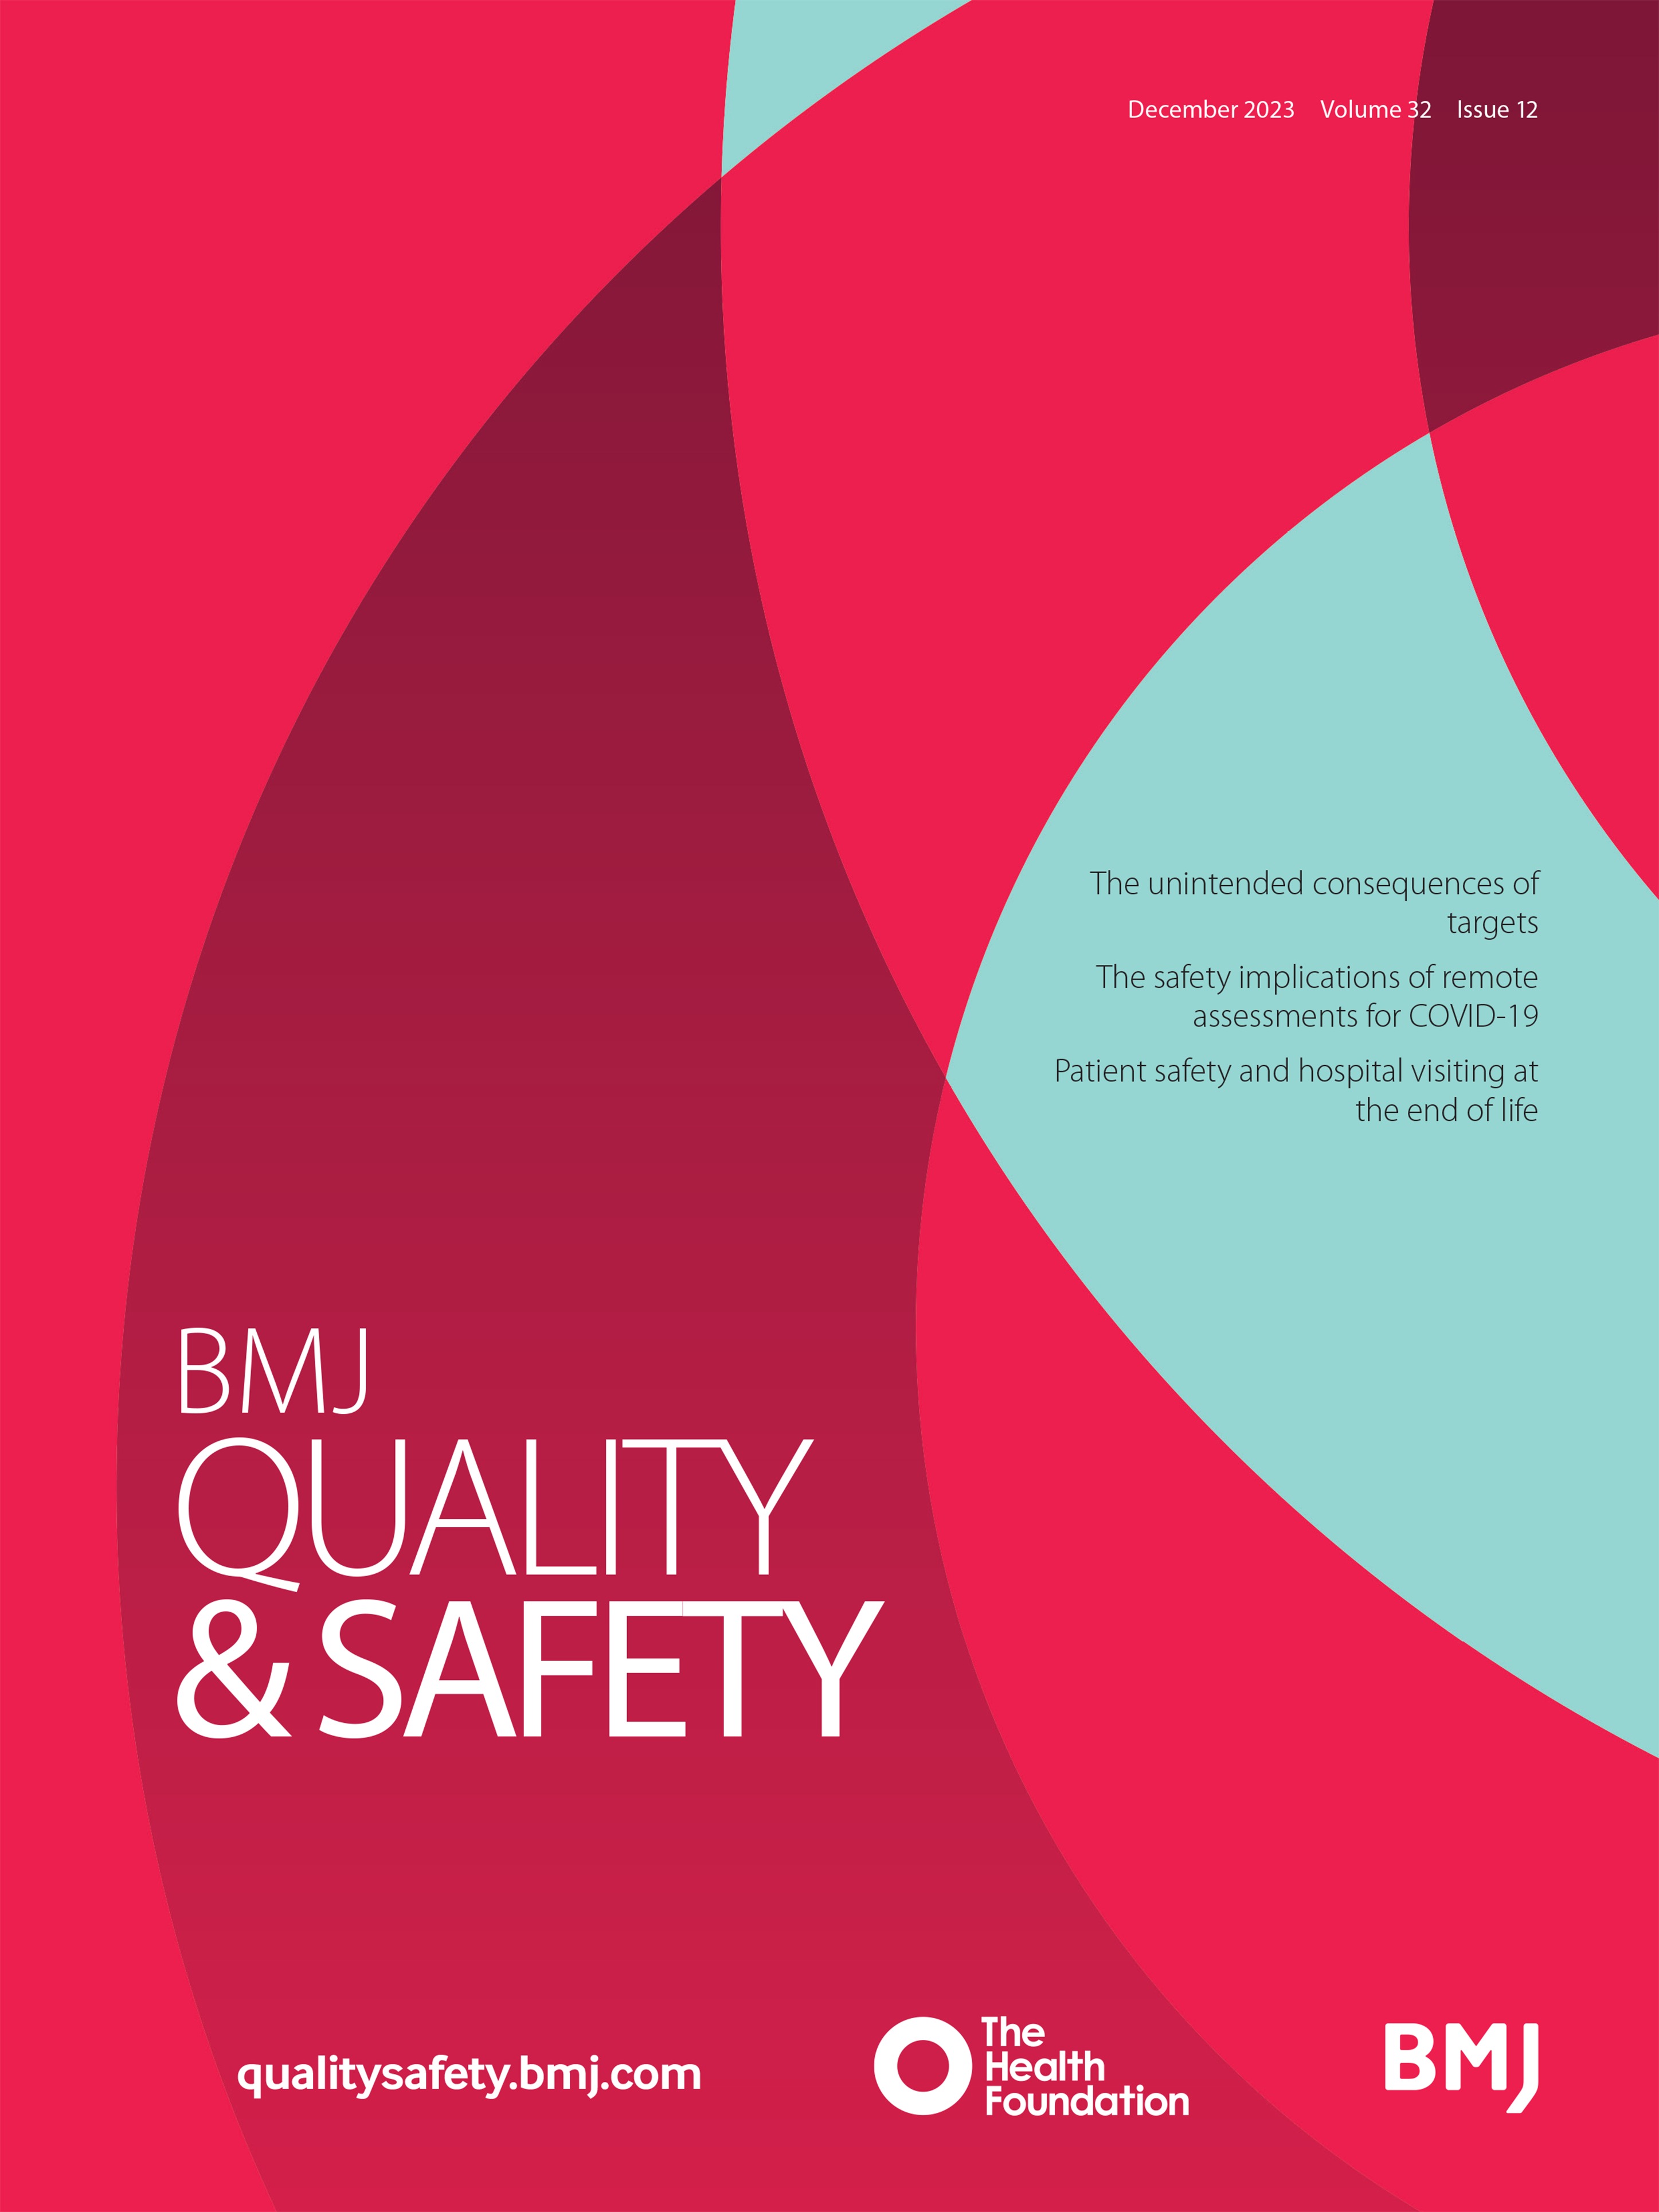 Safety implications of remote assessments for suspected COVID-19: qualitative study in UK primary care